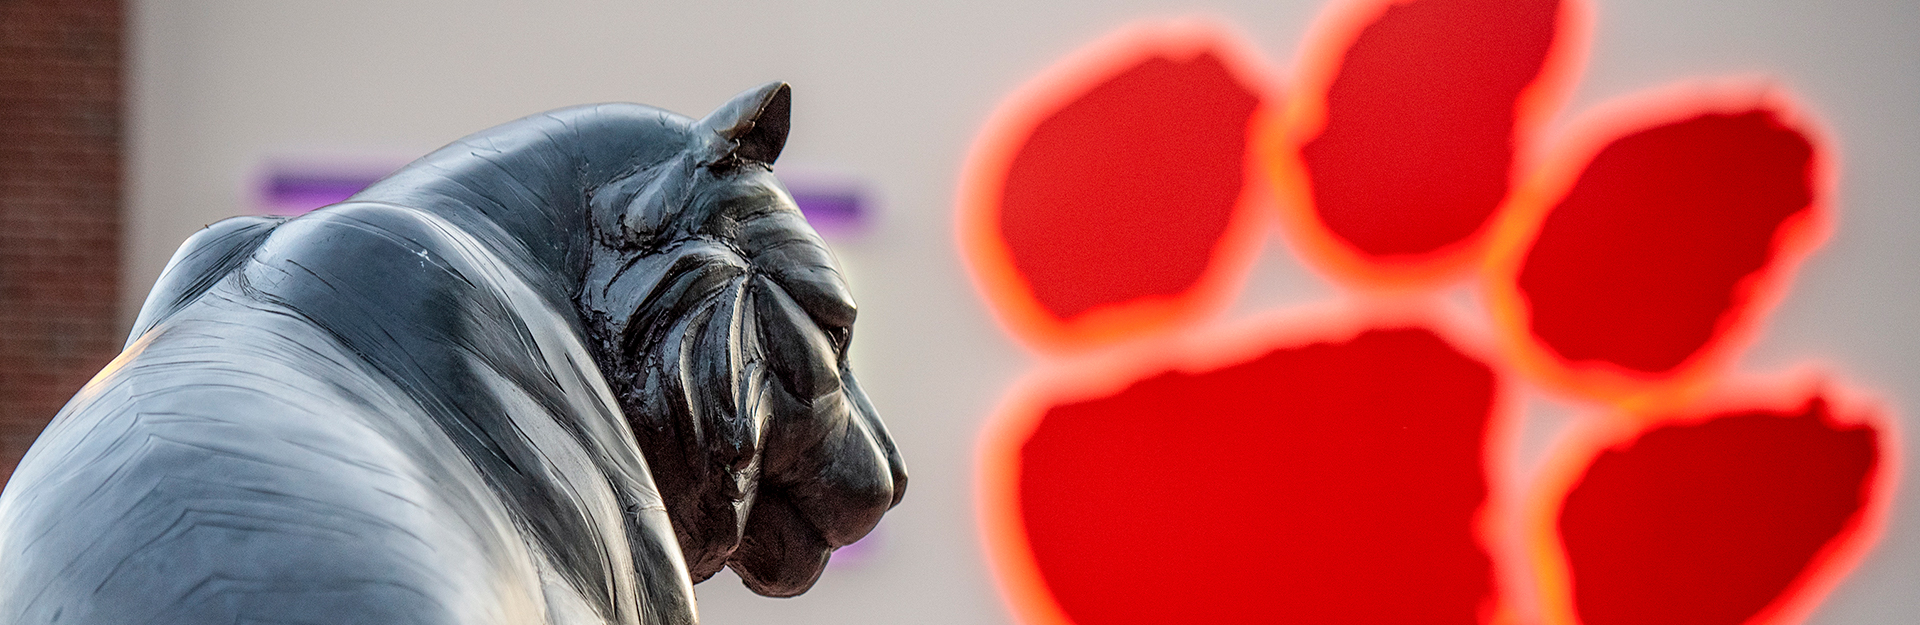 Clemson Tiger and Paw-Why Clemson Banner Image